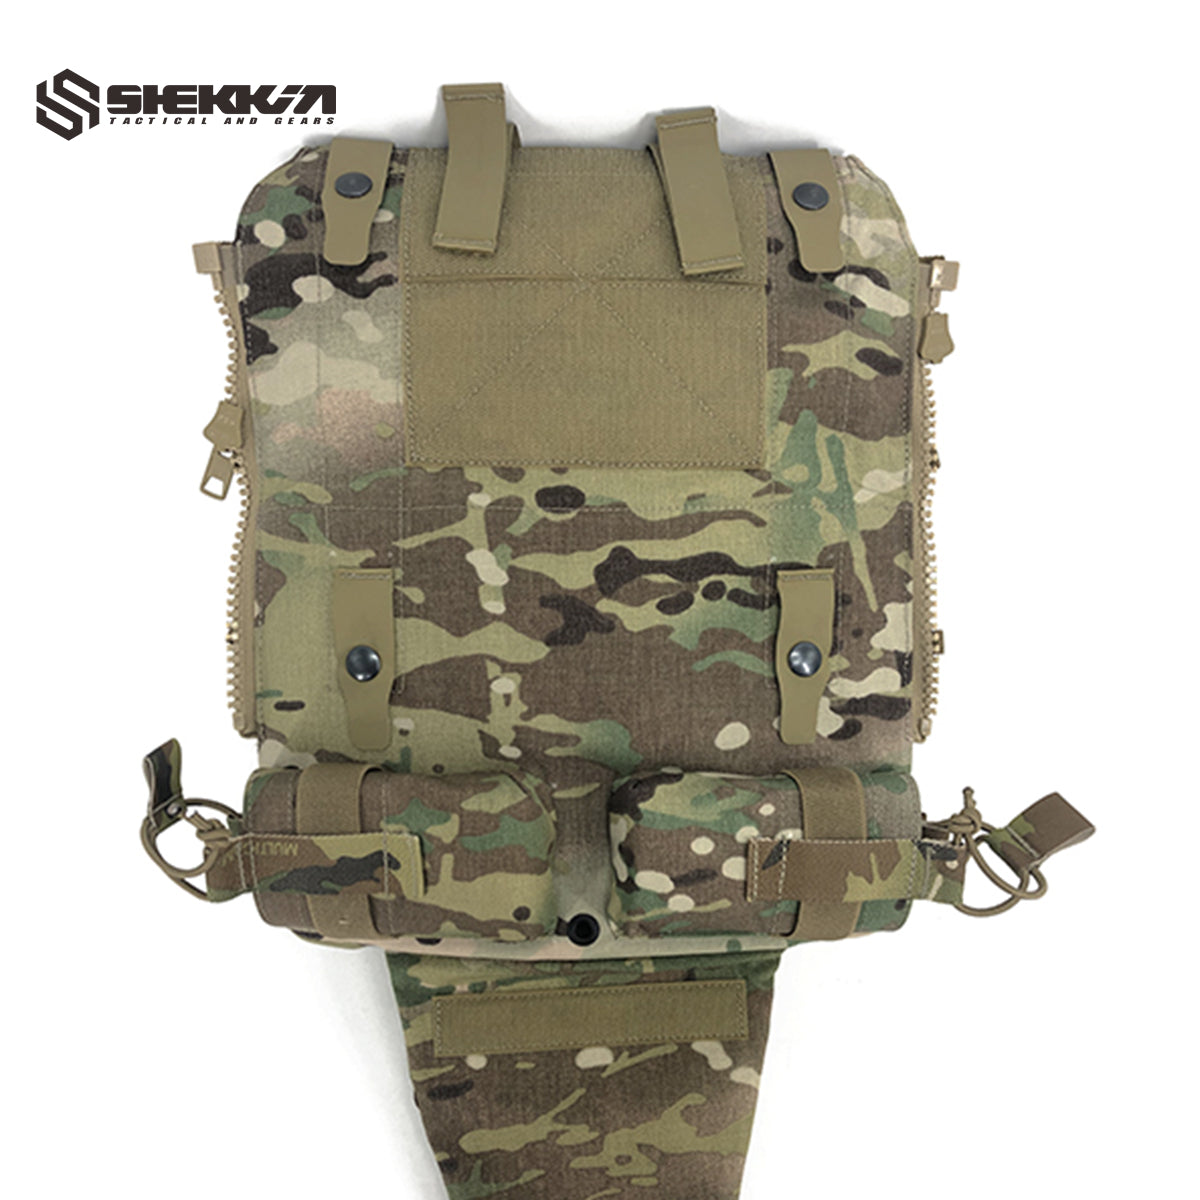 Crye Style Pack zip-on Panel 2.0 - Shekkin Gears